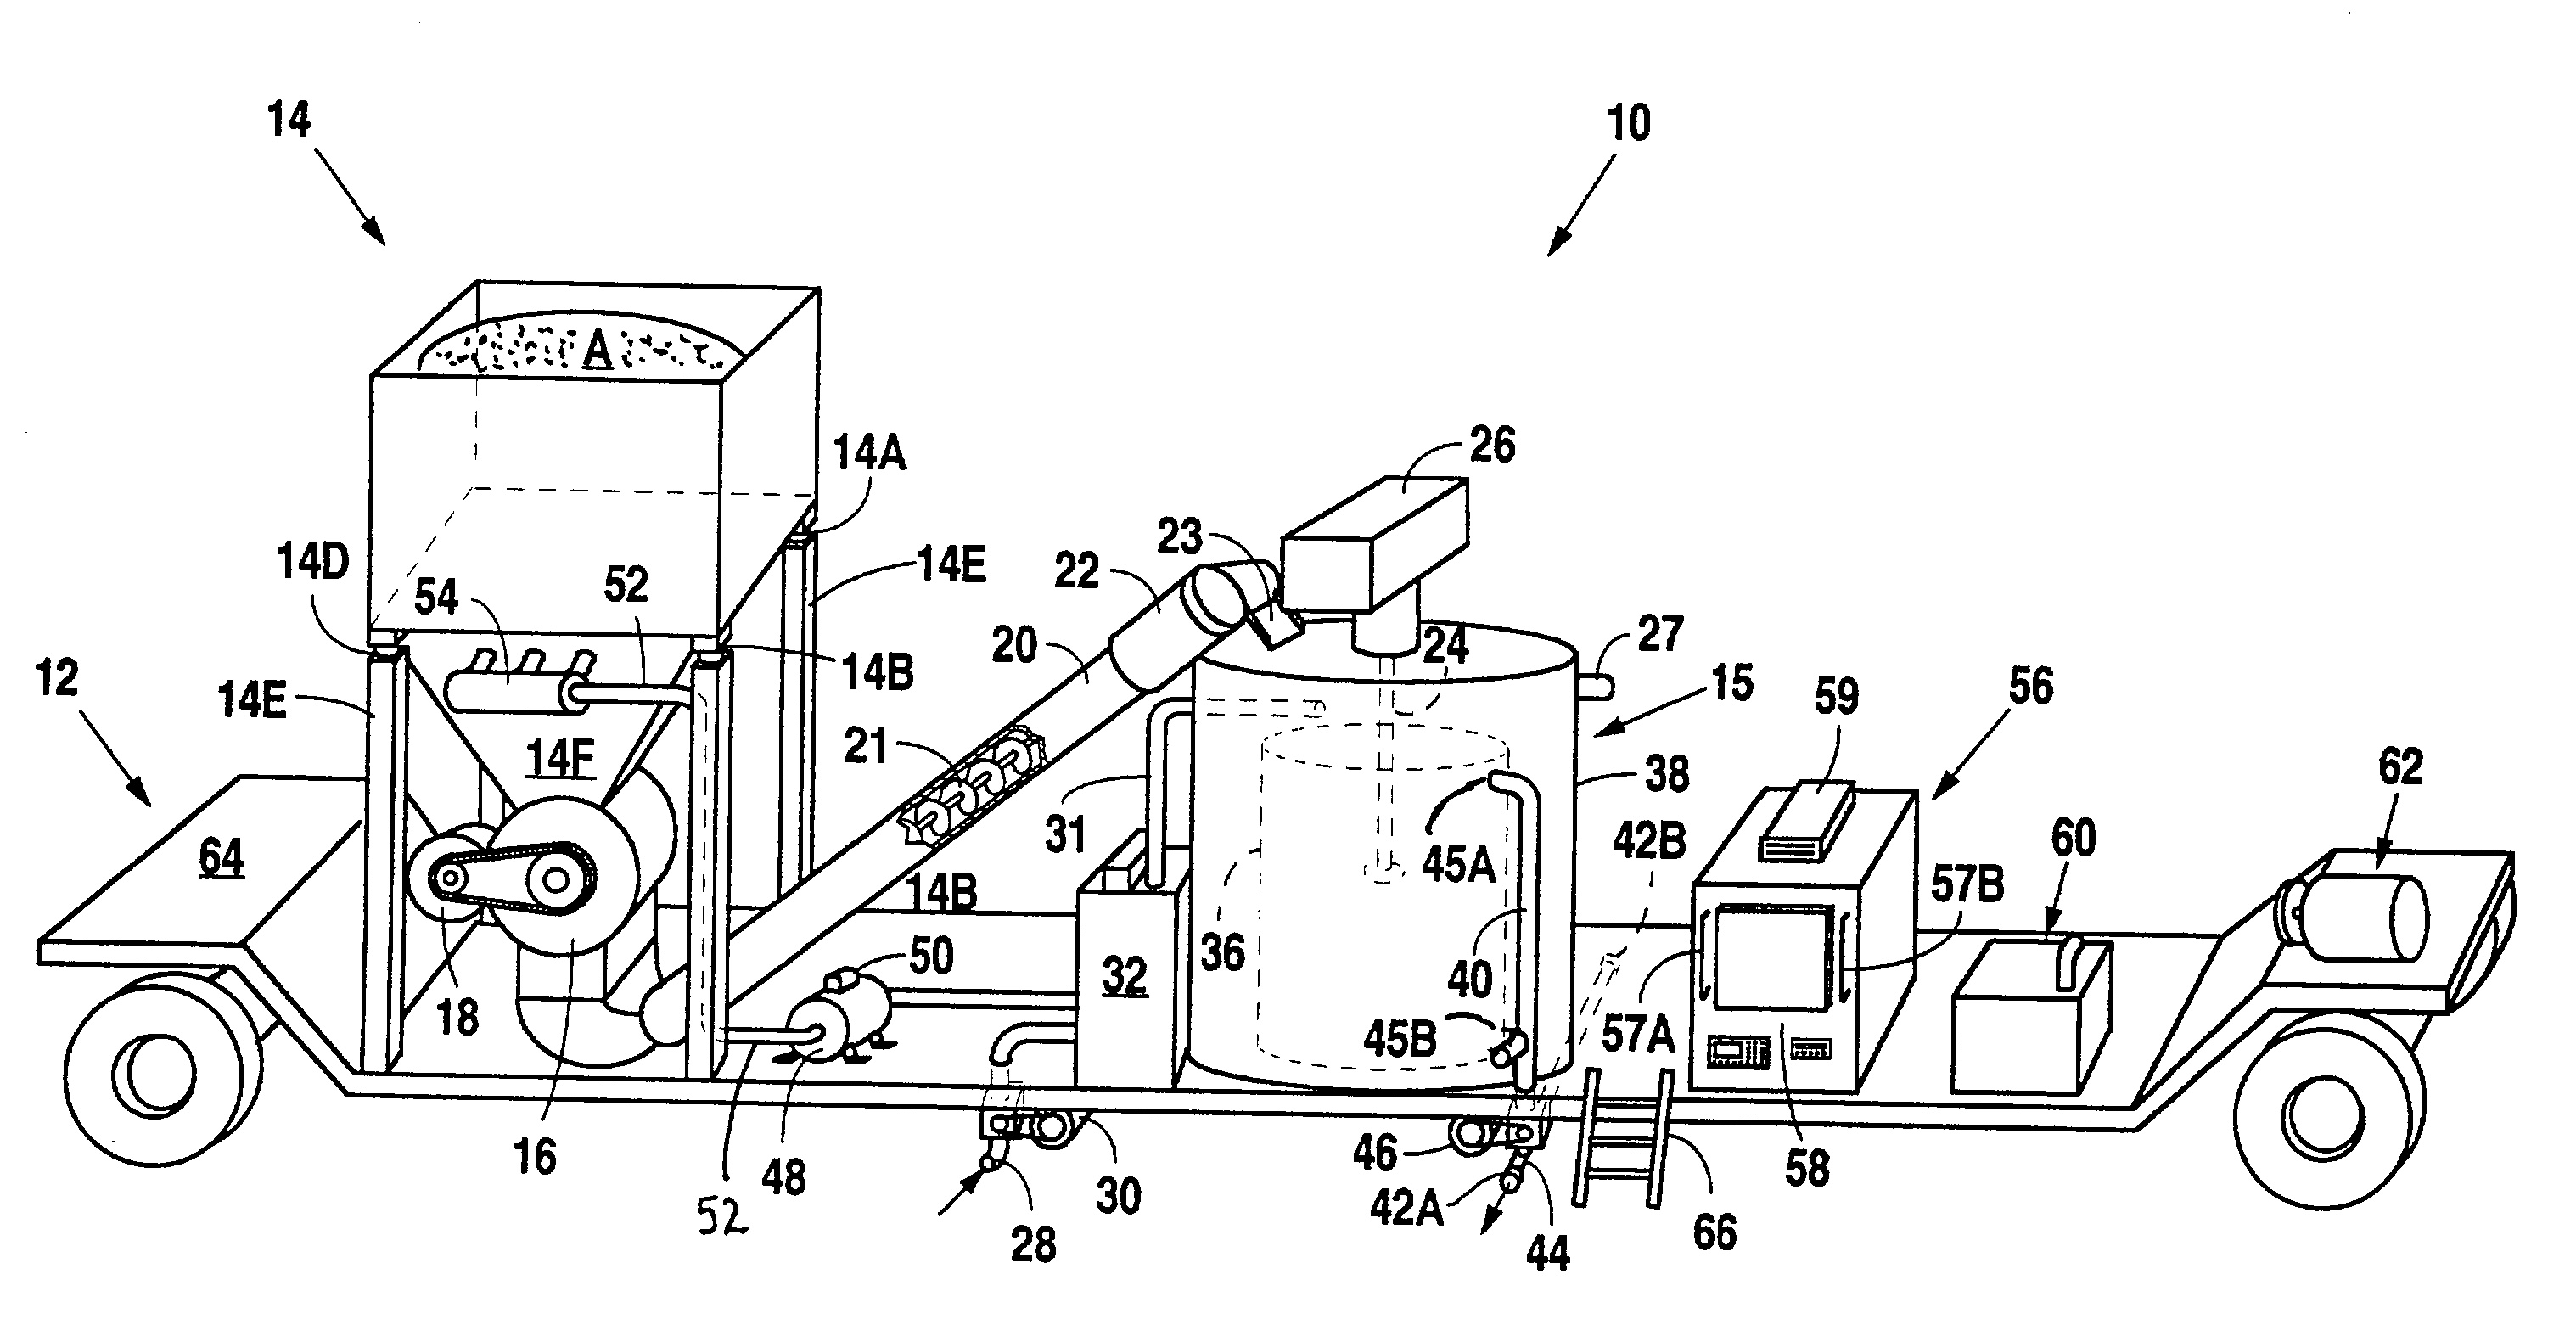 Portable plant for mixing asphalt and rubber